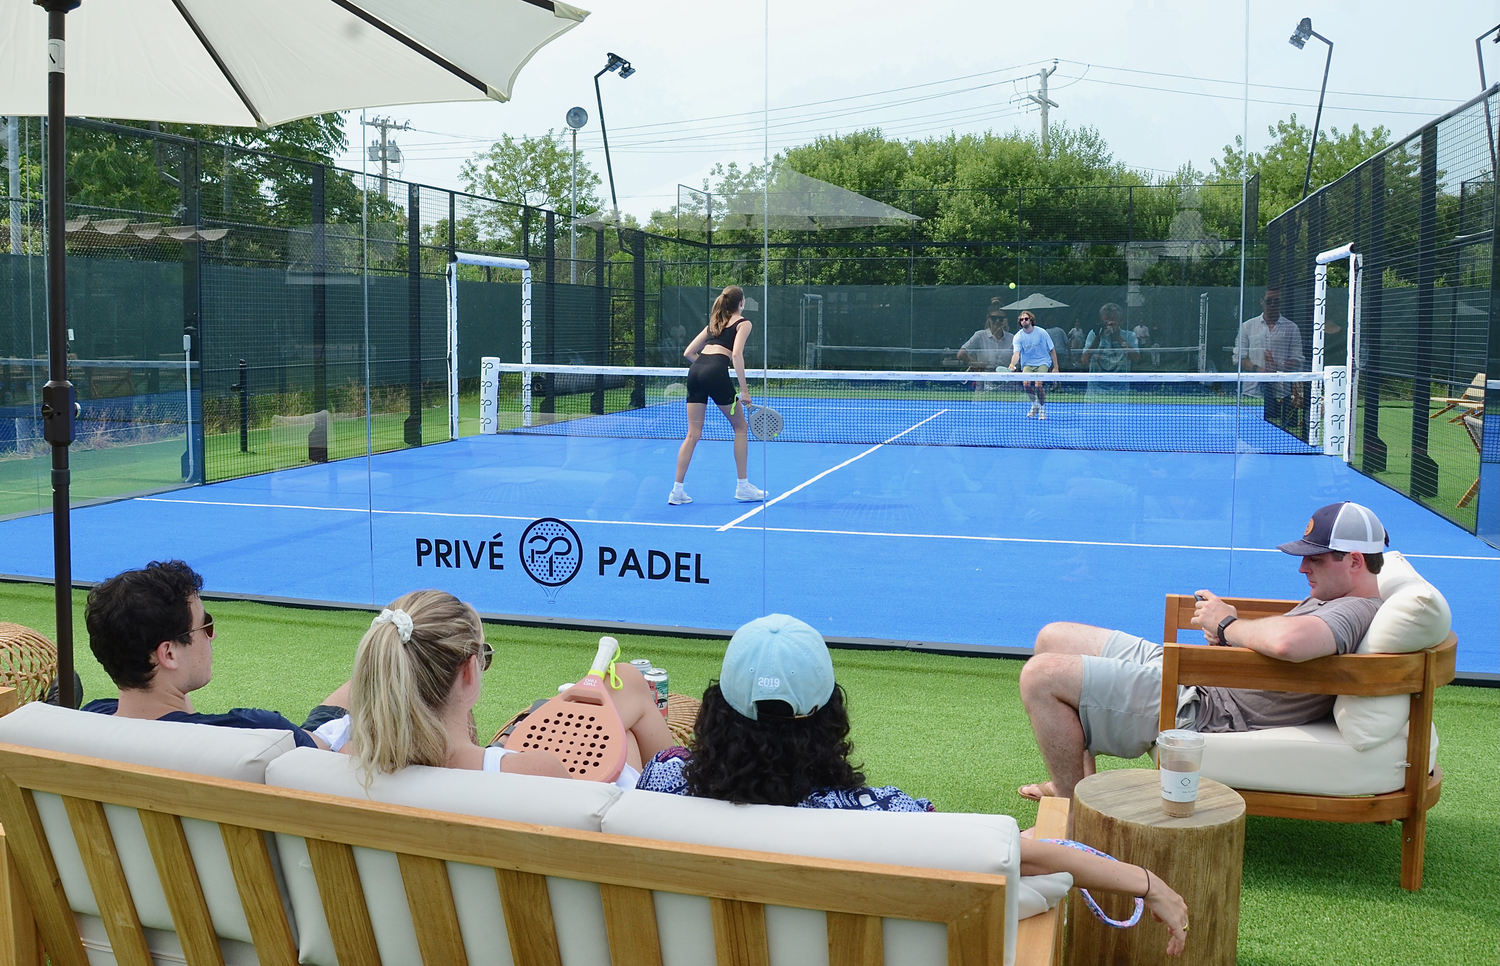 Padel is played in doubles on a 10-meter-by-20-meter court with a serve that is always underhand and hit below waist level. Unlike pickle ball or tennis, padel courts are completely enclosed, and if the ball hits the wall around the court after bouncing on the ground, it is still in play, keeping the game fast paced, and simple for beginners.  KYRIL BROMLEY